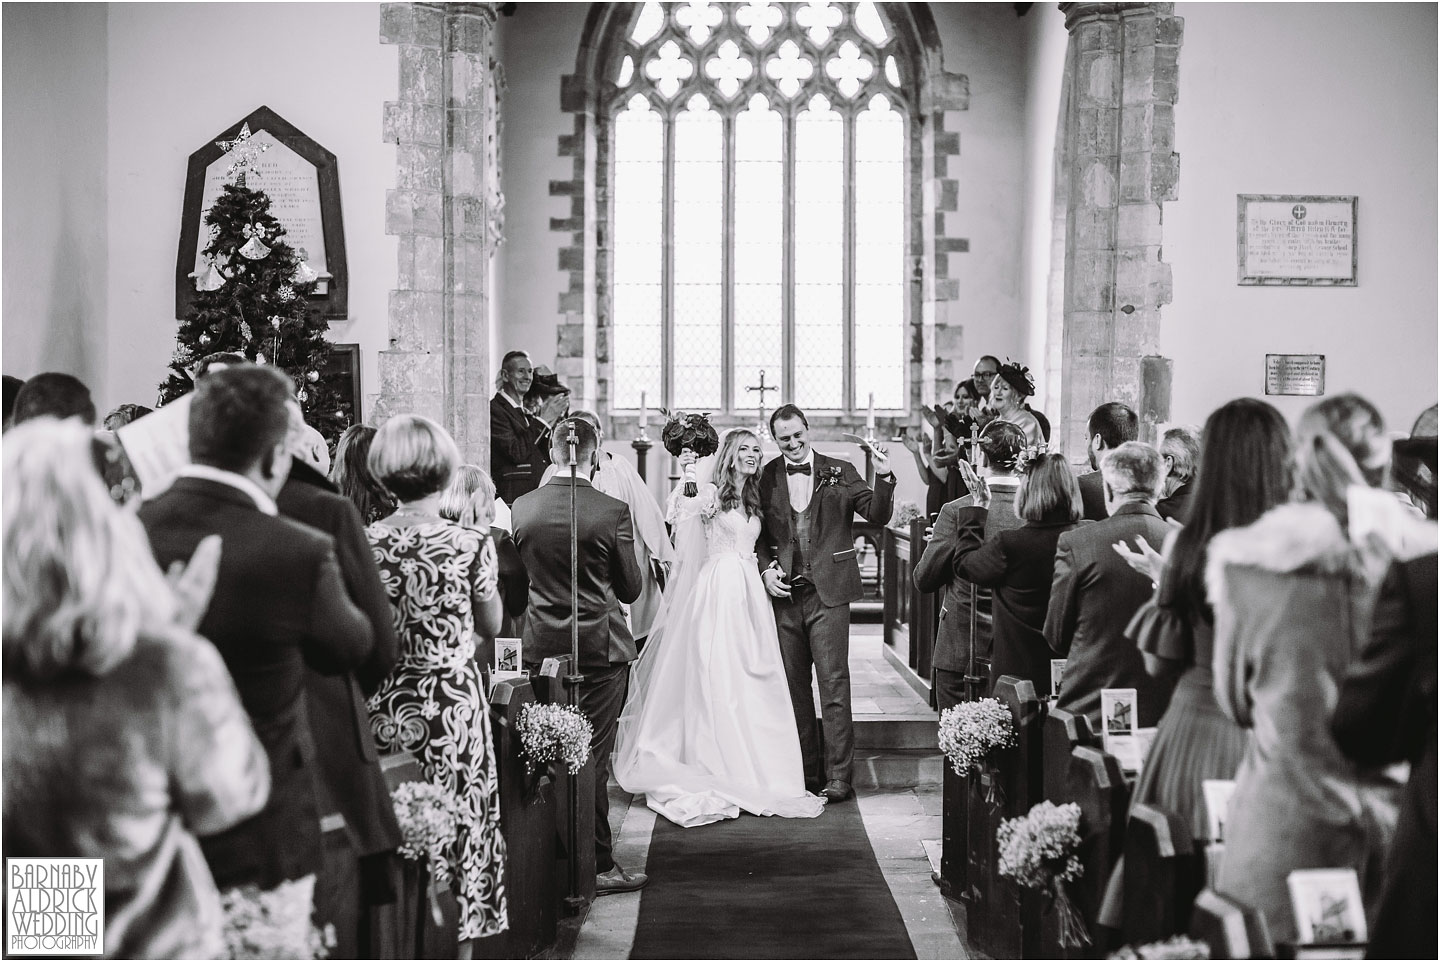 Wedding celebrations at St Peter's Church in Walton near Wetherby, Priory Cottages Barn Wedding Venue Photos, Yorkshire Barn Venue Photos